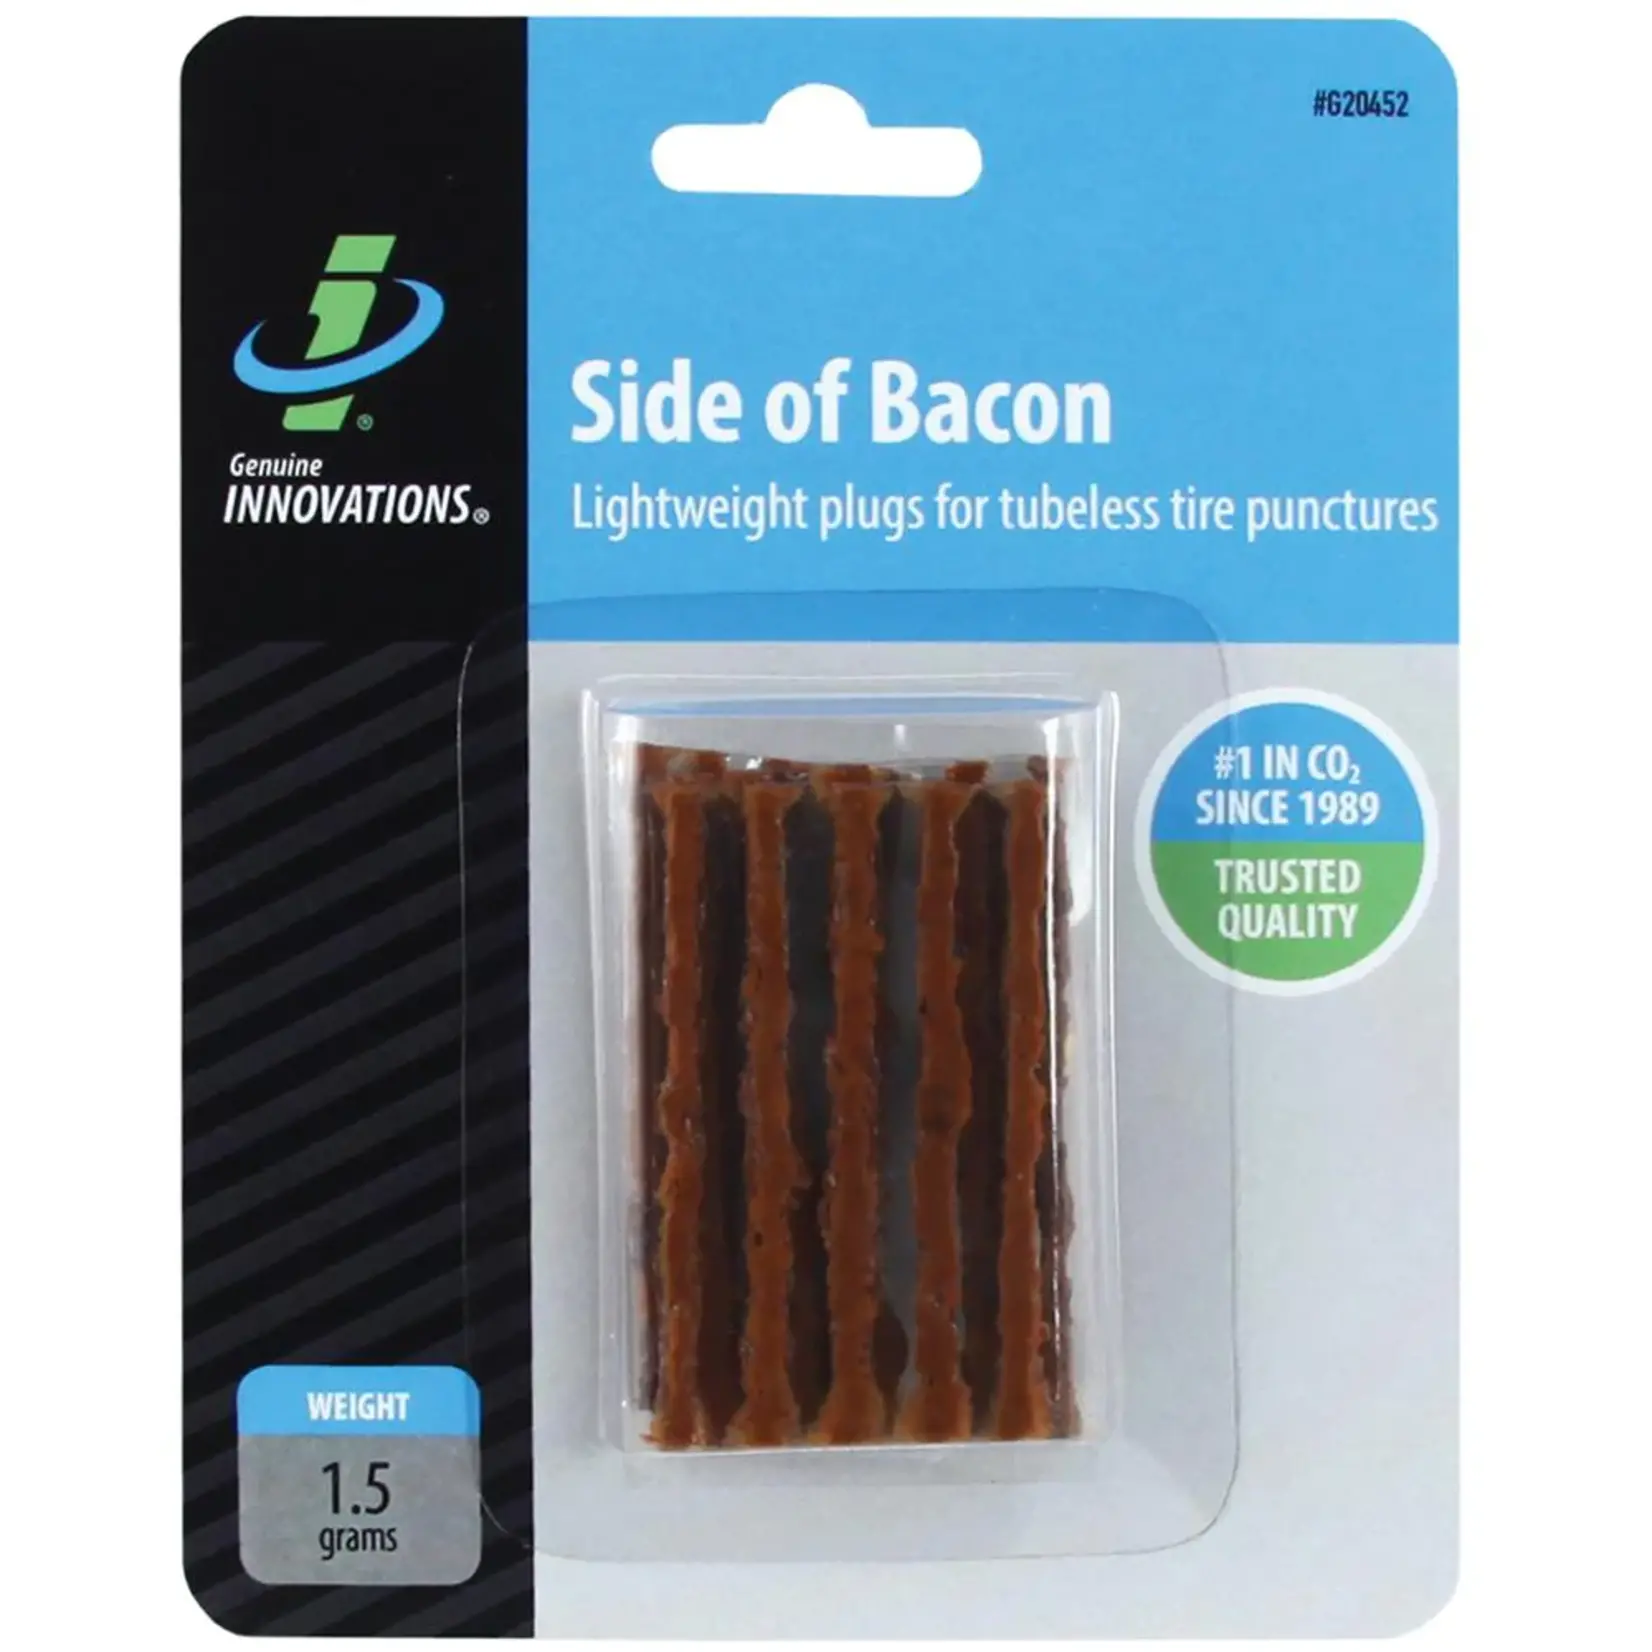 Genuine Innovations Tire Part Innovations Side Of Bacon 20 Pieces